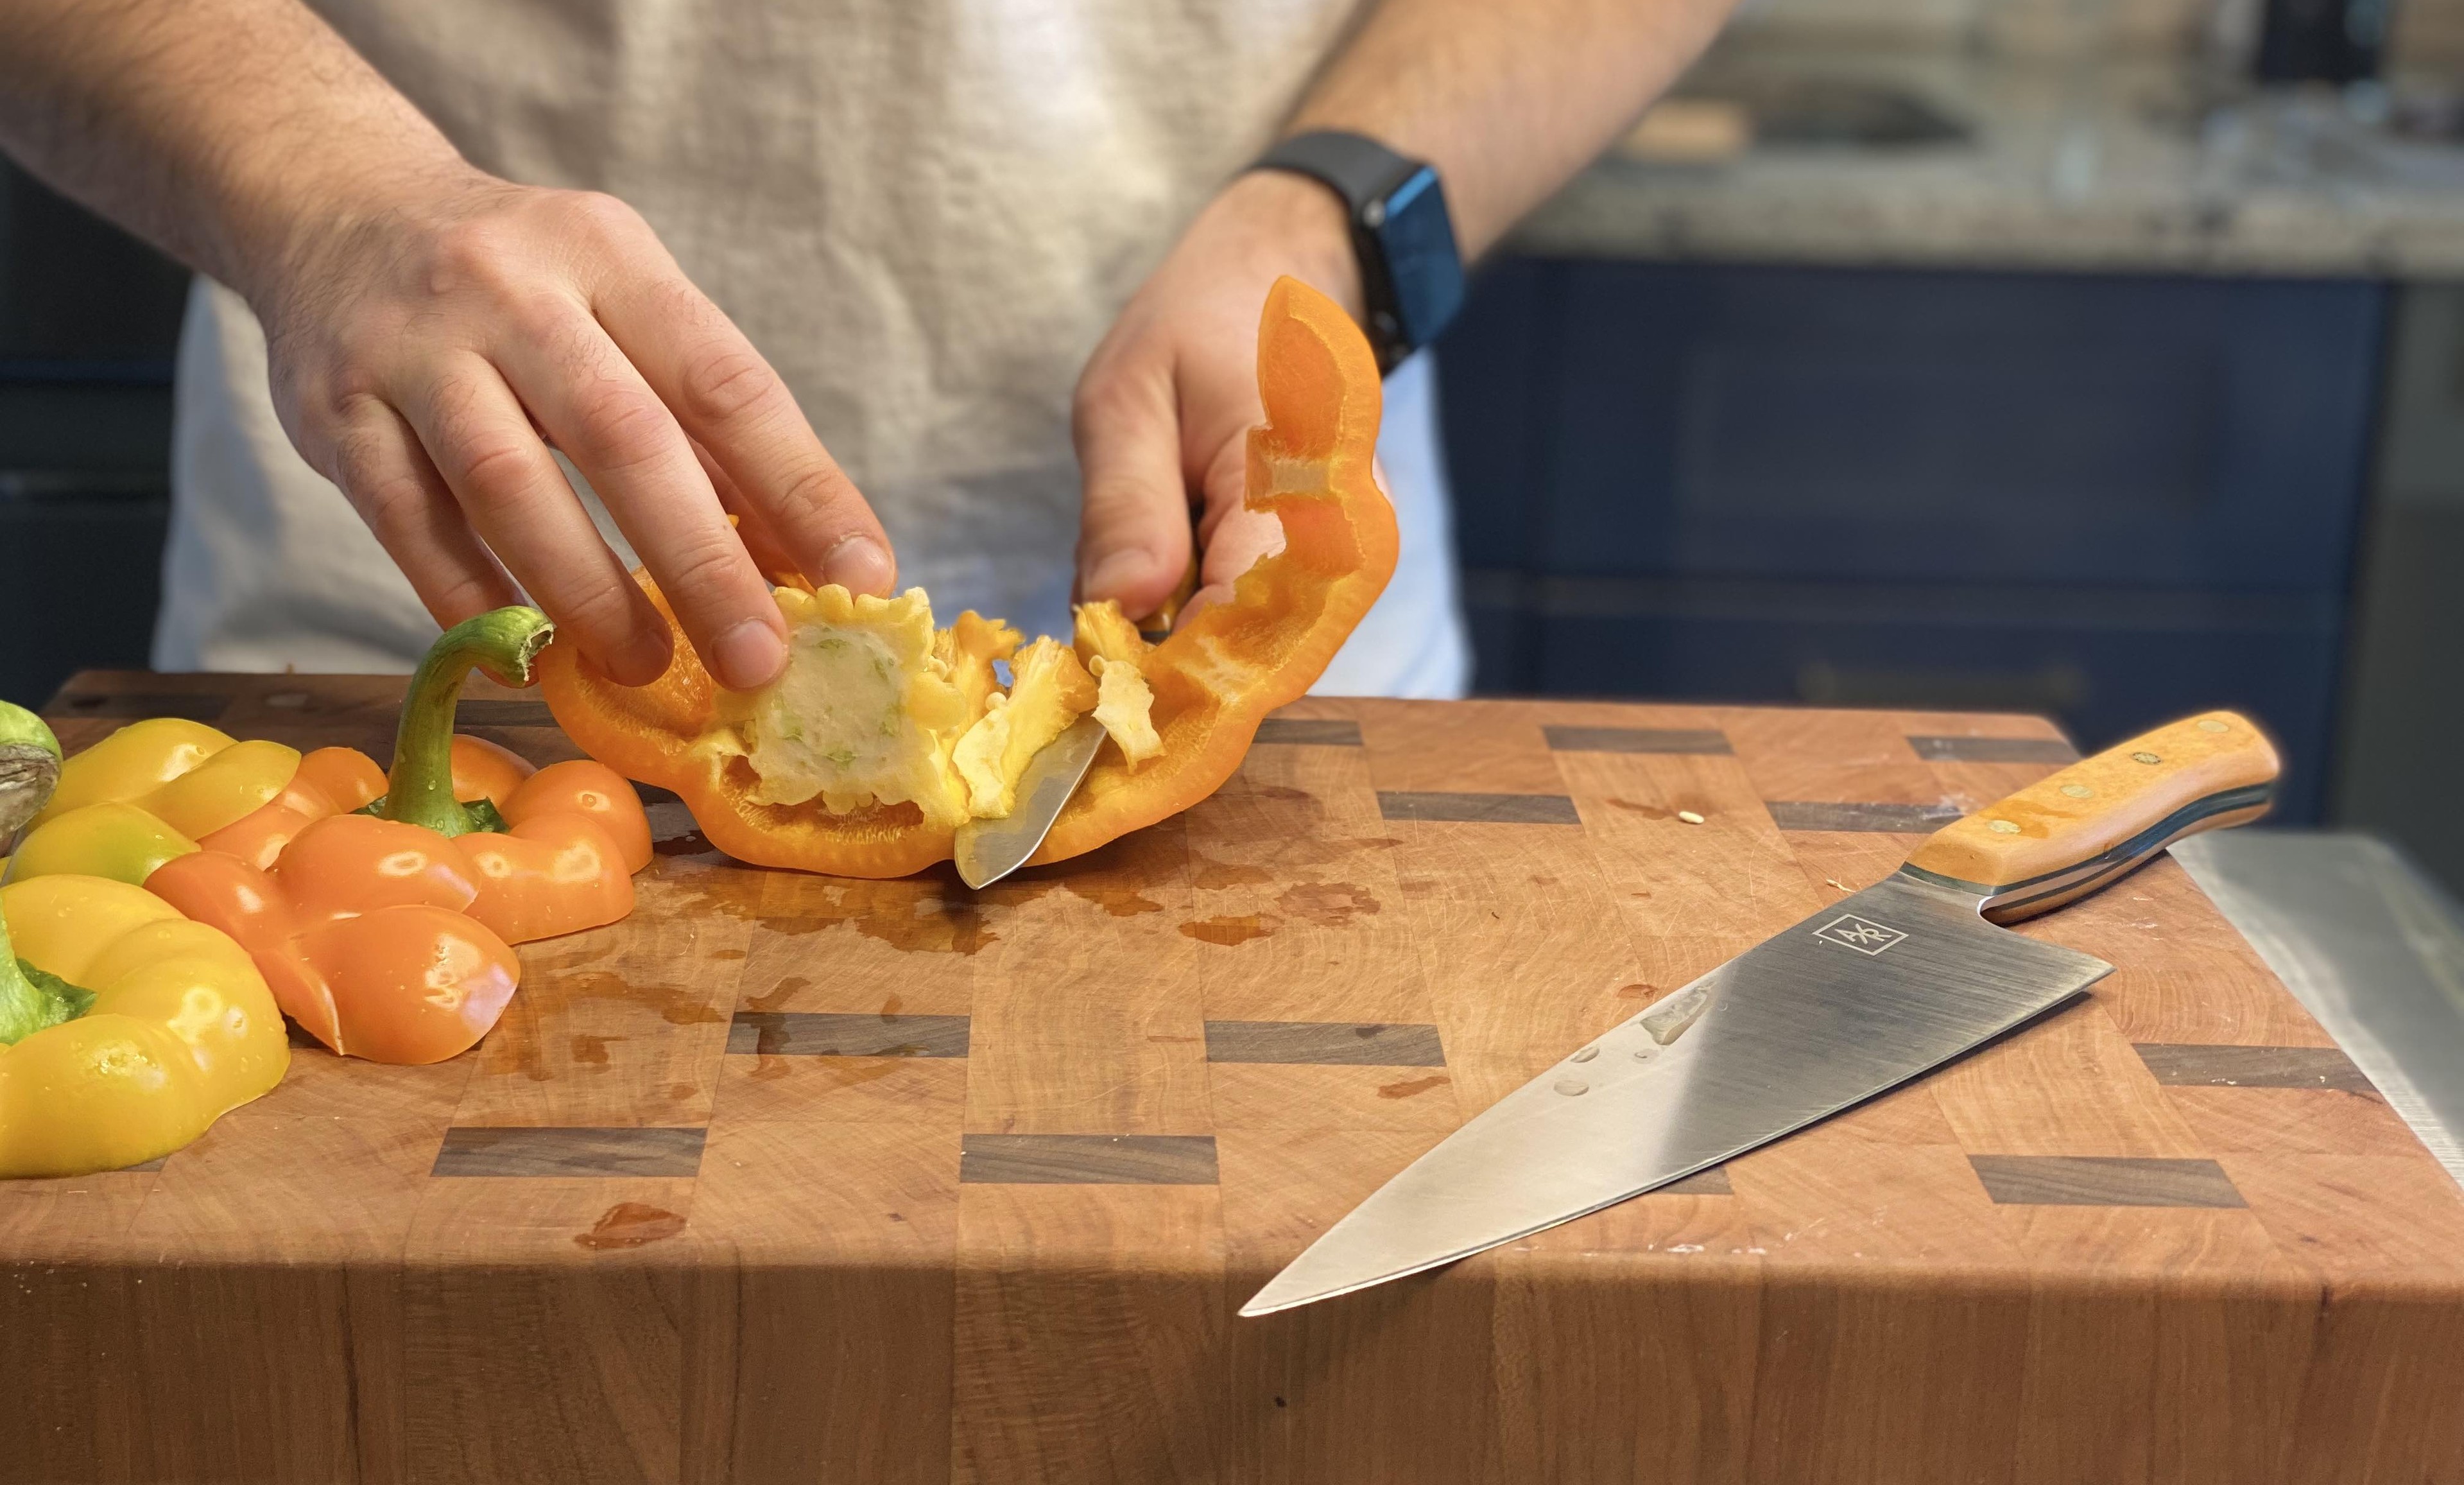 Removing the pith from an orange pepper with an Artisan Revere small petty knife